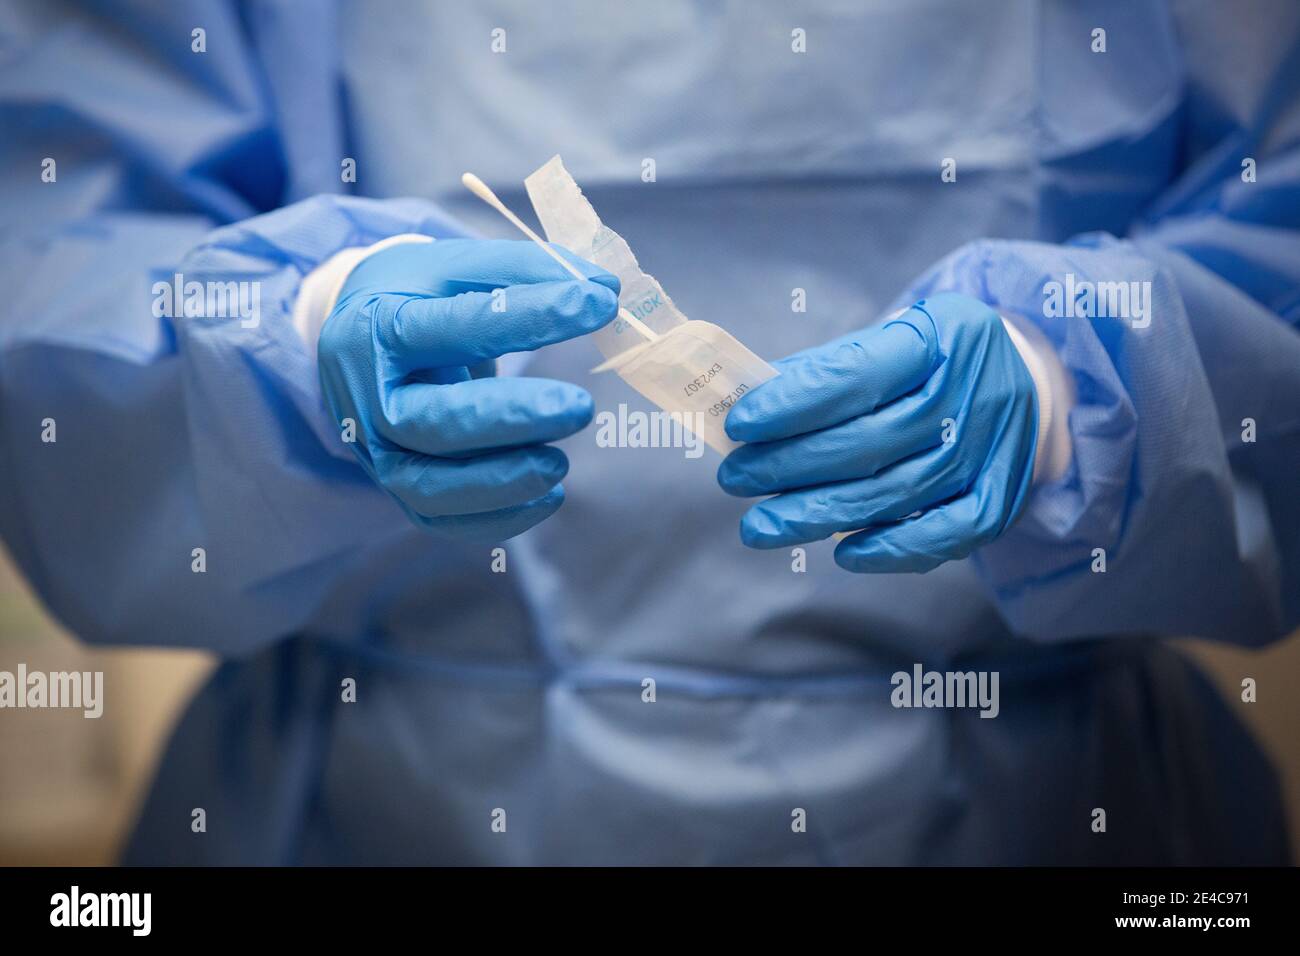 A pharmacist holds a COVID-19 test swab at a pharmacy in Amherstview, Ontario on Friday, January 22, 2021, as the COVID-19 pandemic continues across C Stock Photo